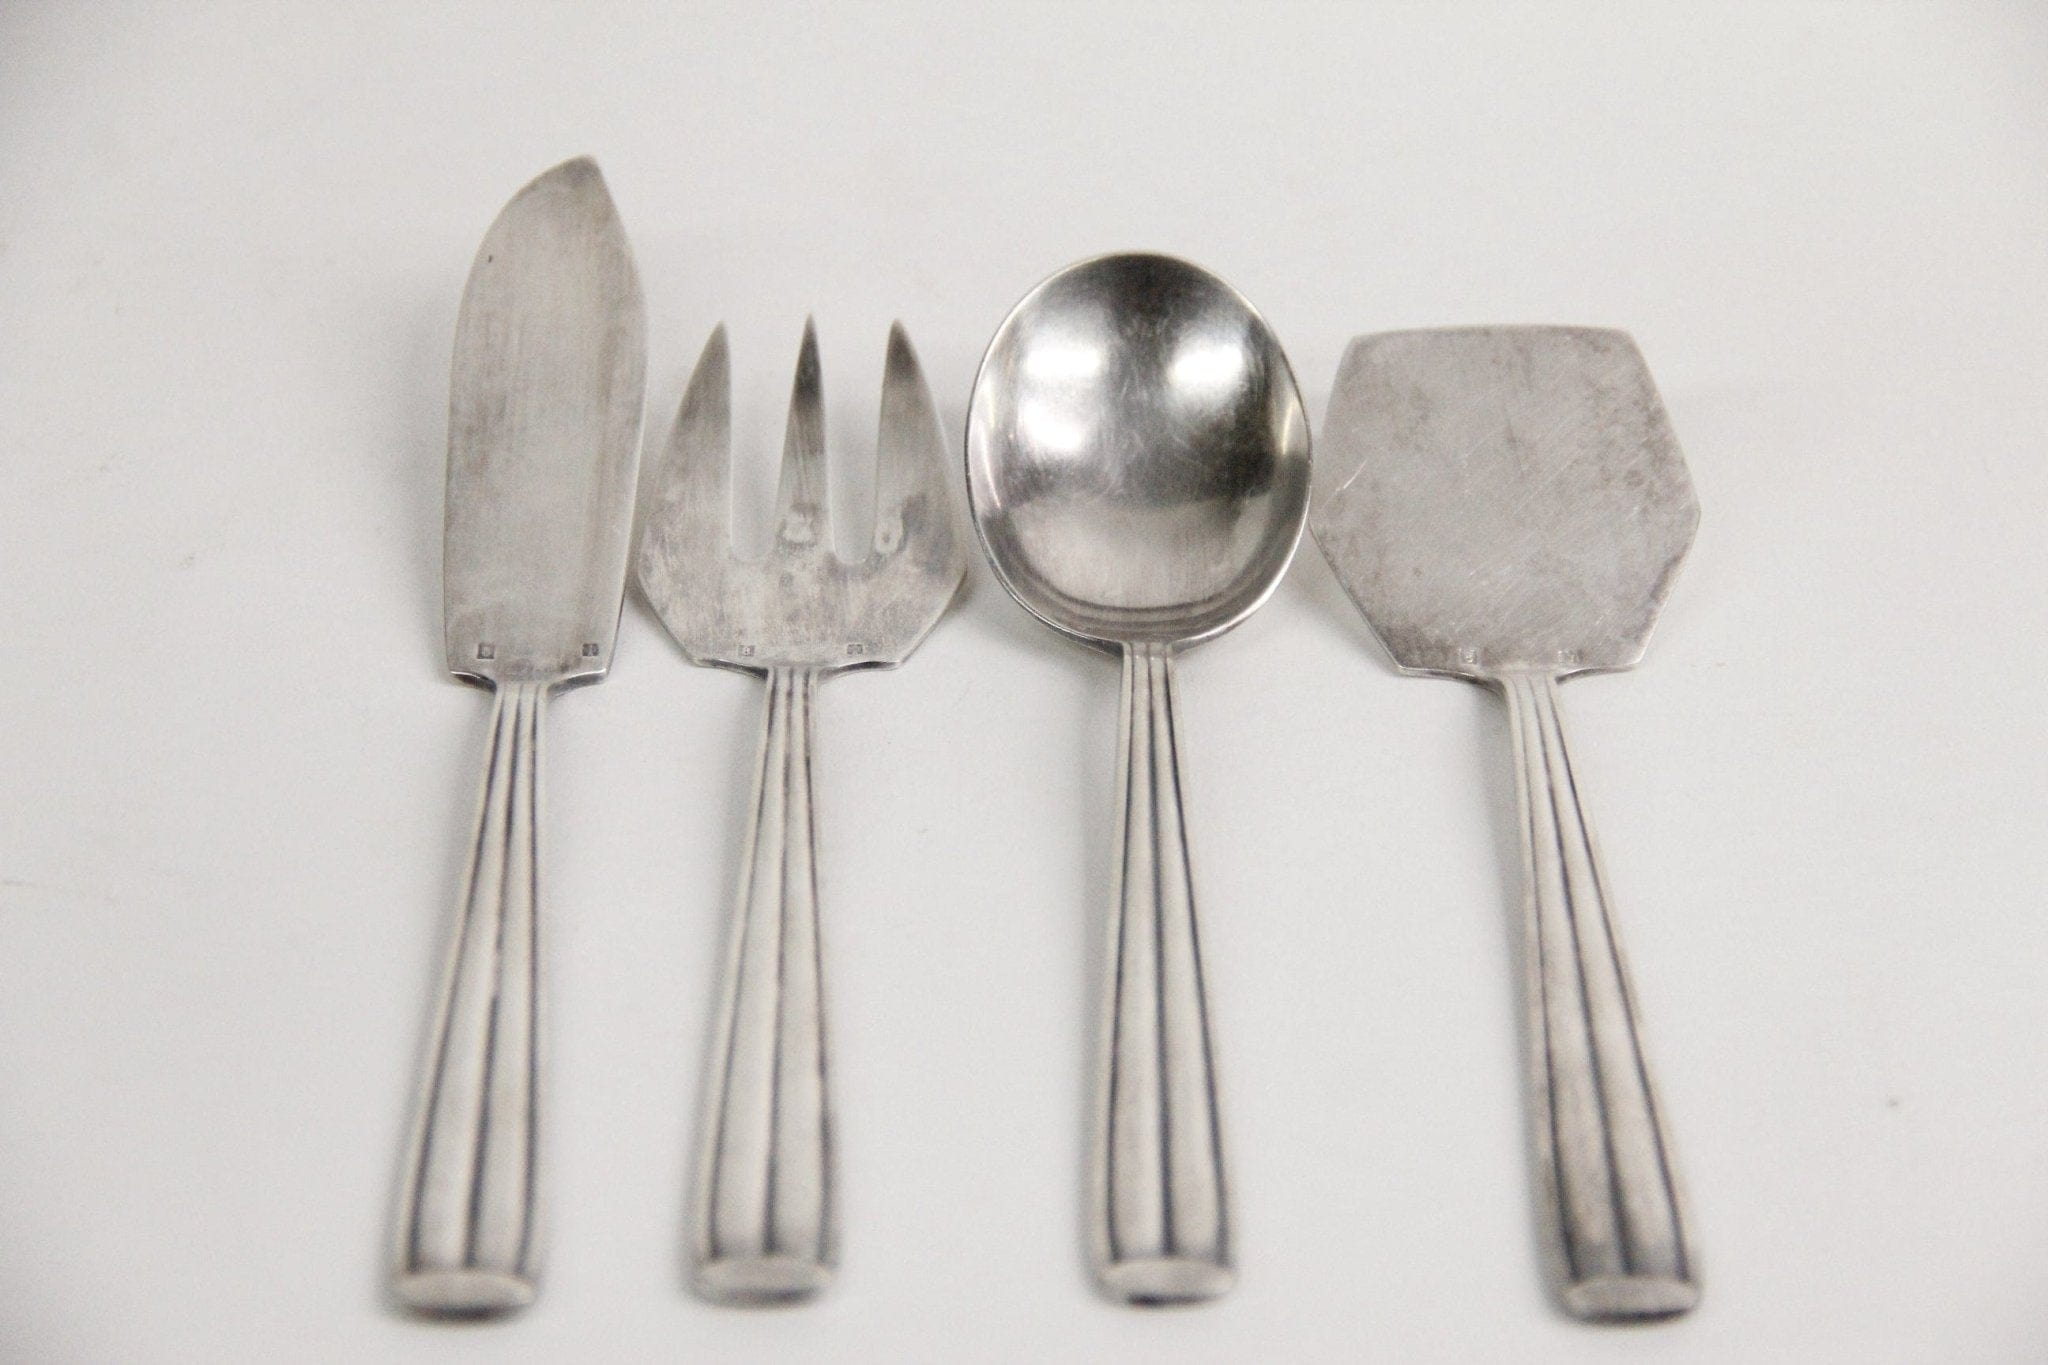 Vintage French Silver Flatware | Hors D'oeuvres Set - Debra Hall Lifestyle